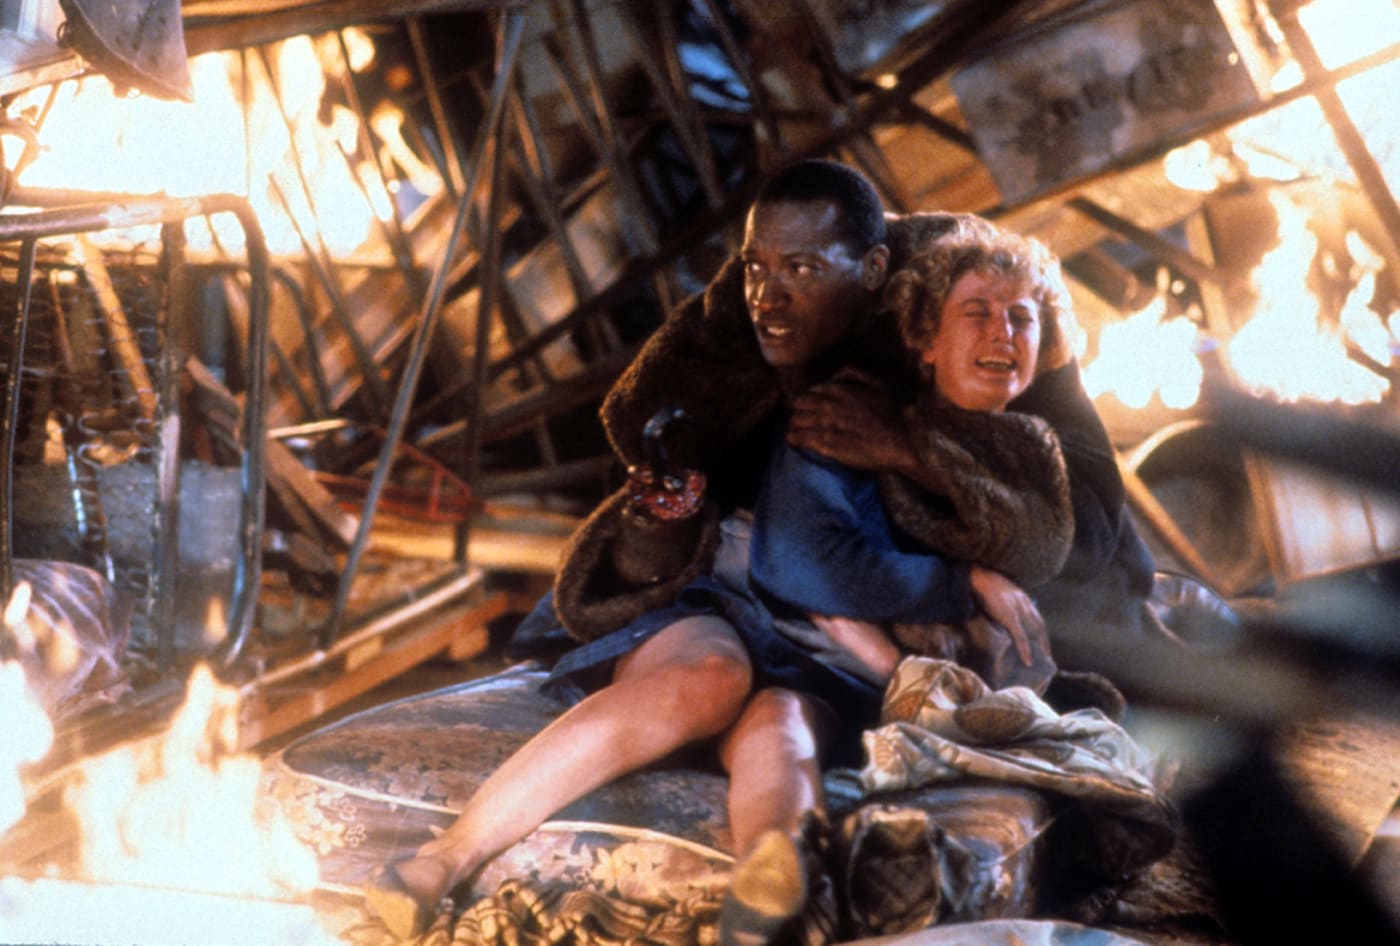 Tony Todd holds onto Virginia Madsen in a scene from the film 'Candyman', 1992.